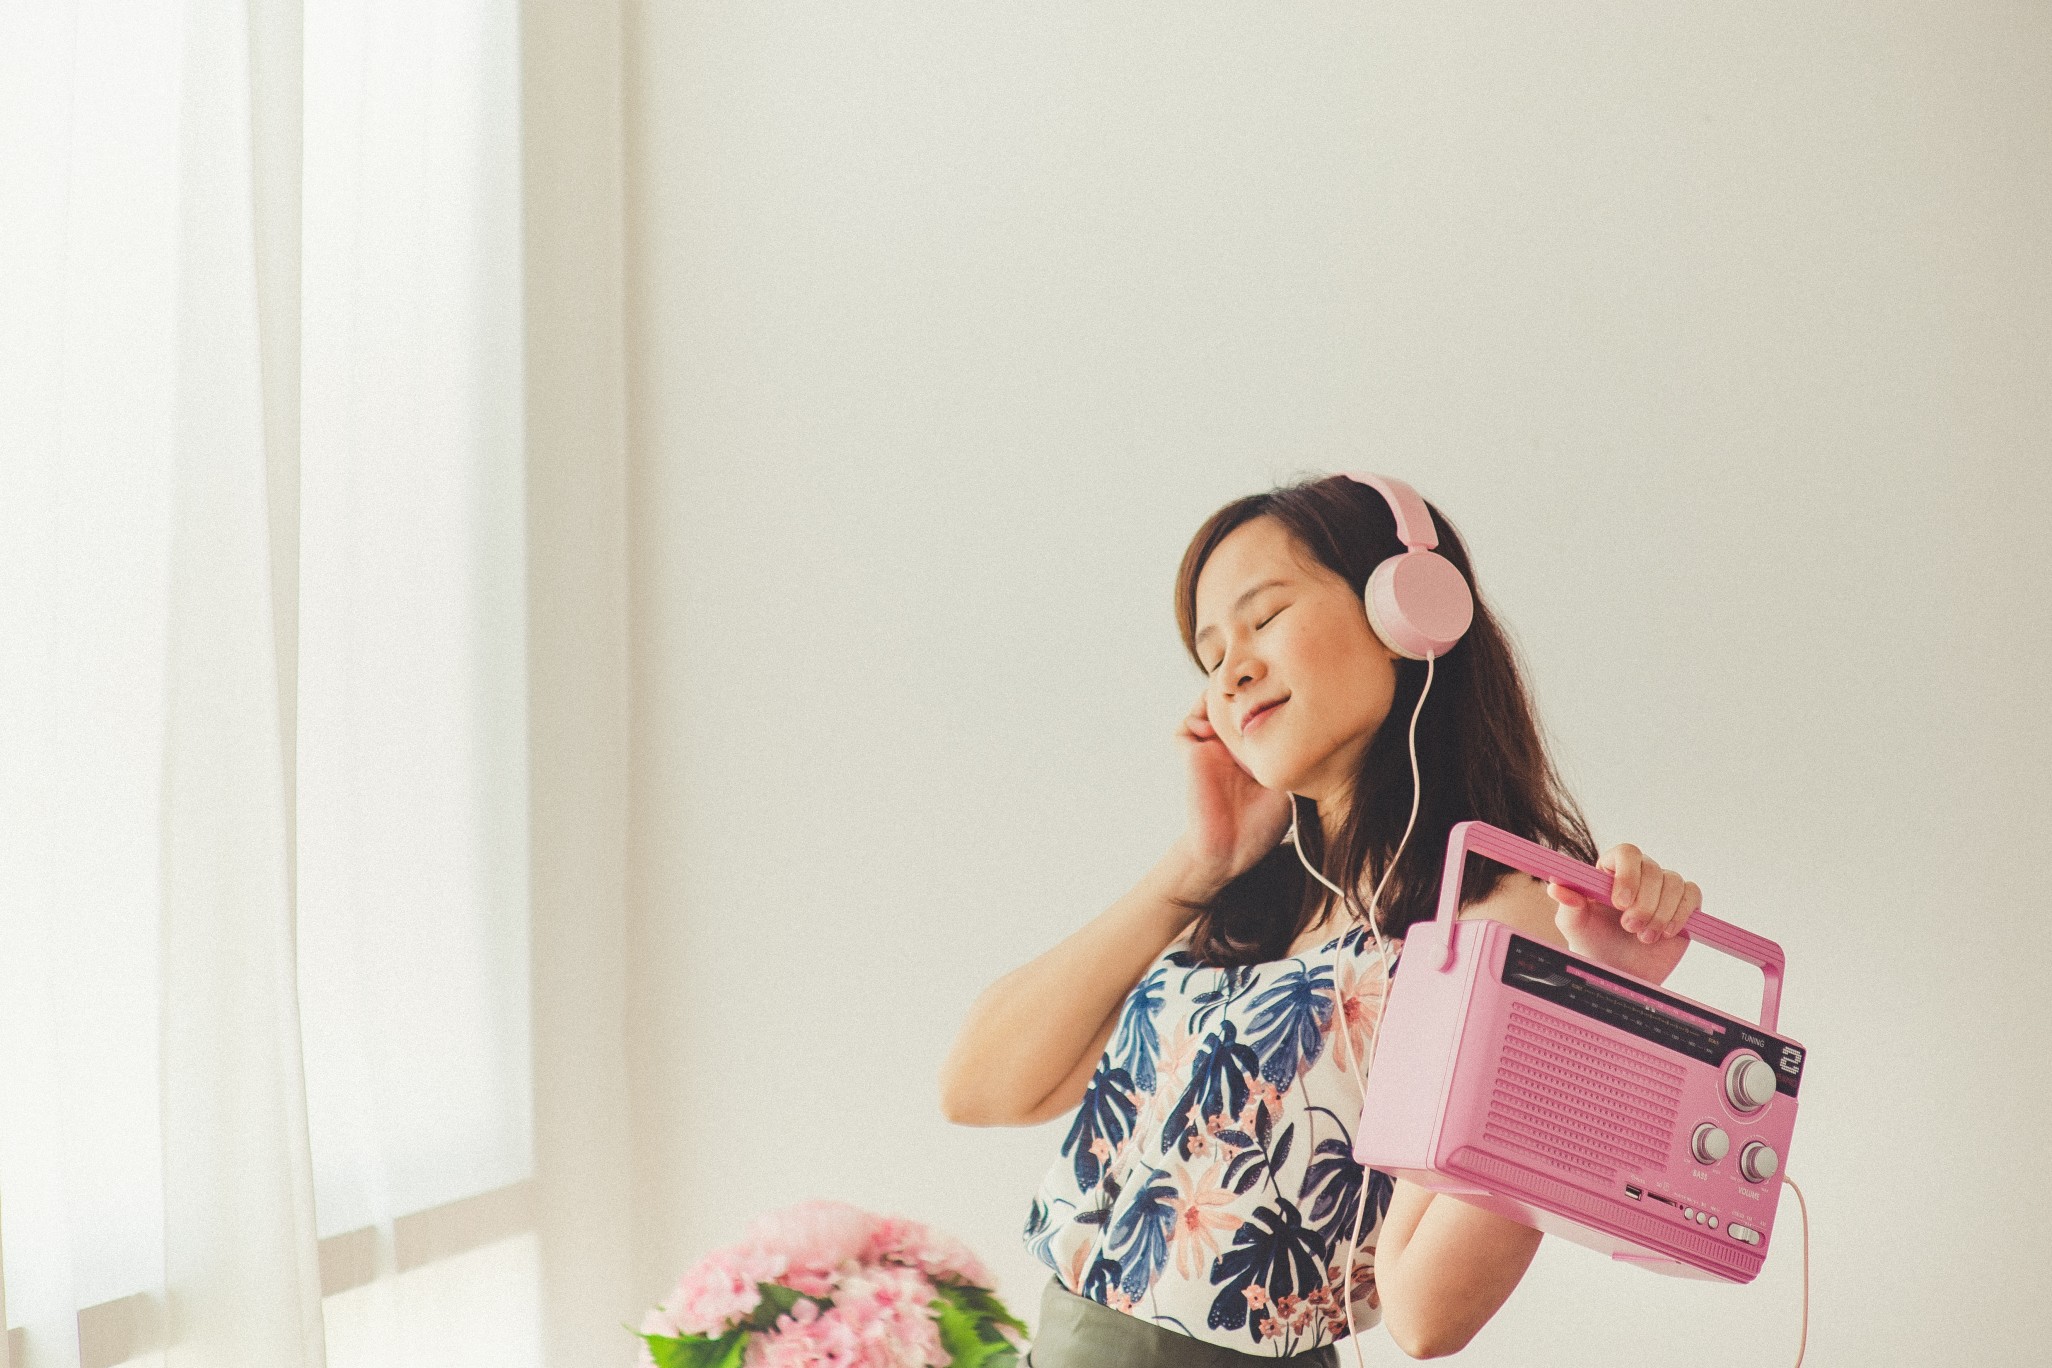 an-asian-woman-listening-to-the-pink-radio-trasistor-dancing-motion-and-wearing-vintage-cloth_t20_gRadda